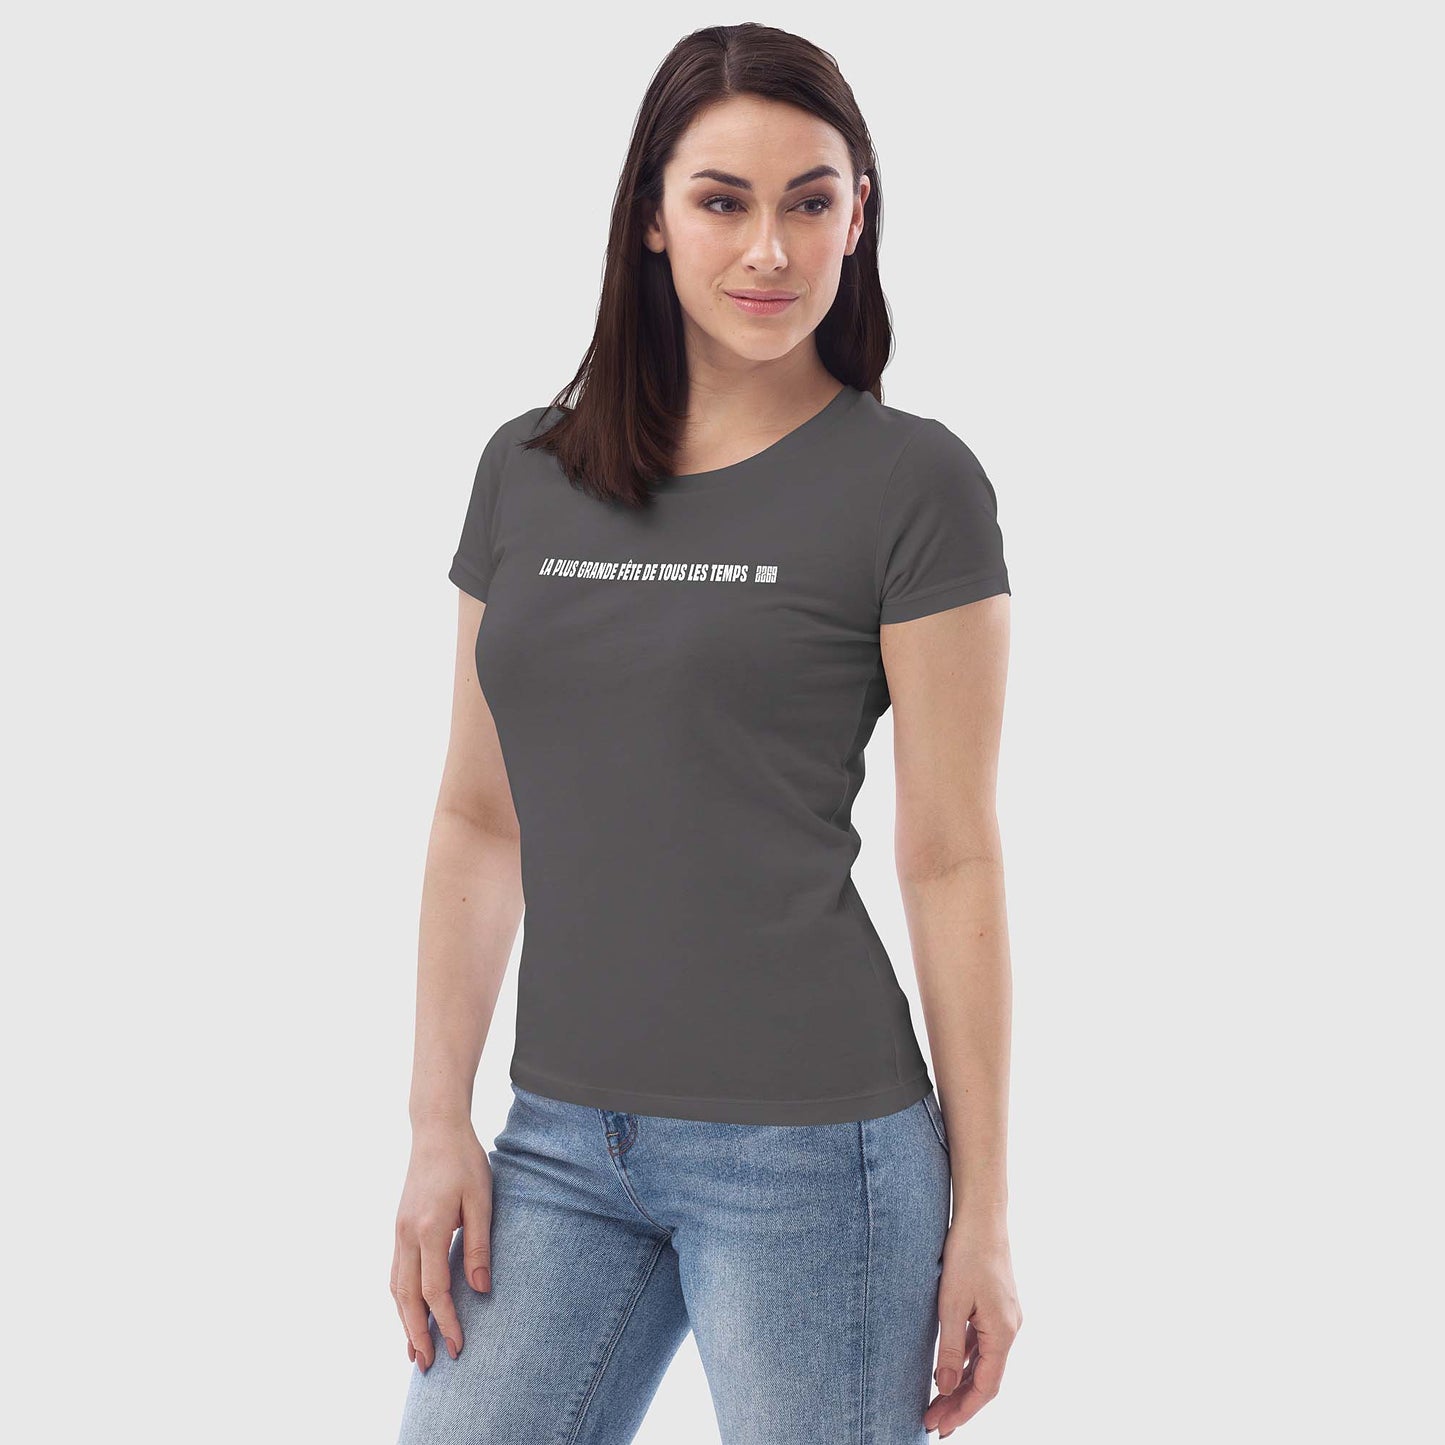 Women's anthracite fitted organic cotton t-shirt with French 2269 party message